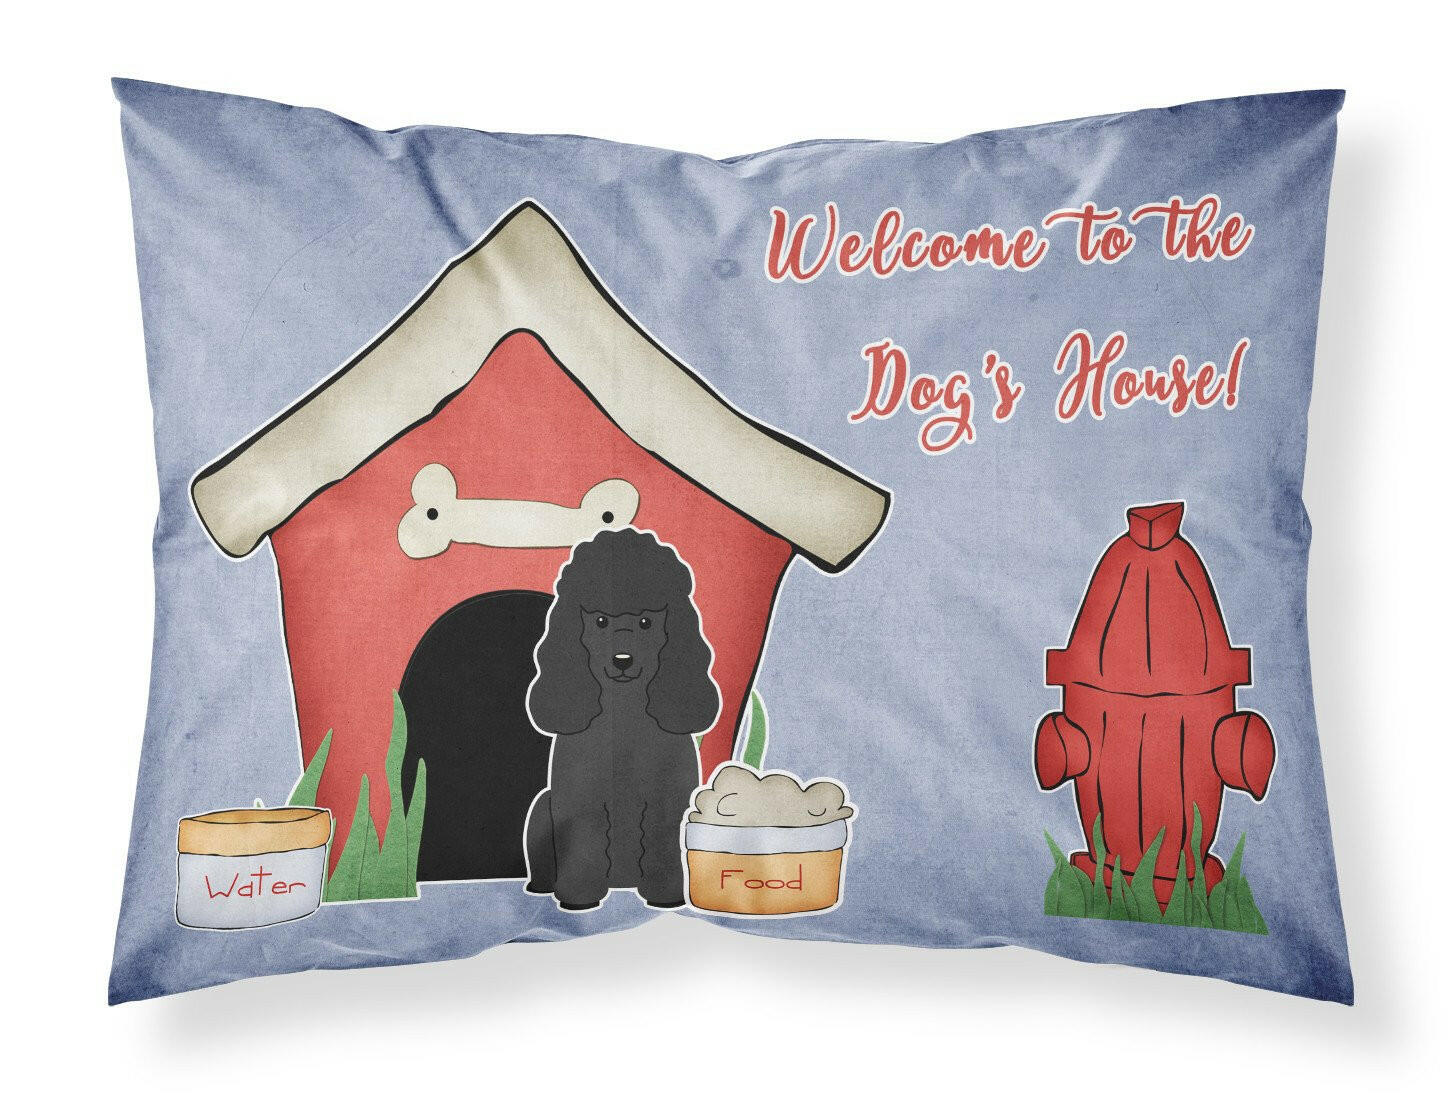 Dog House Collection Poodle Black Fabric Standard Pillowcase BB2825PILLOWCASE by Caroline's Treasures